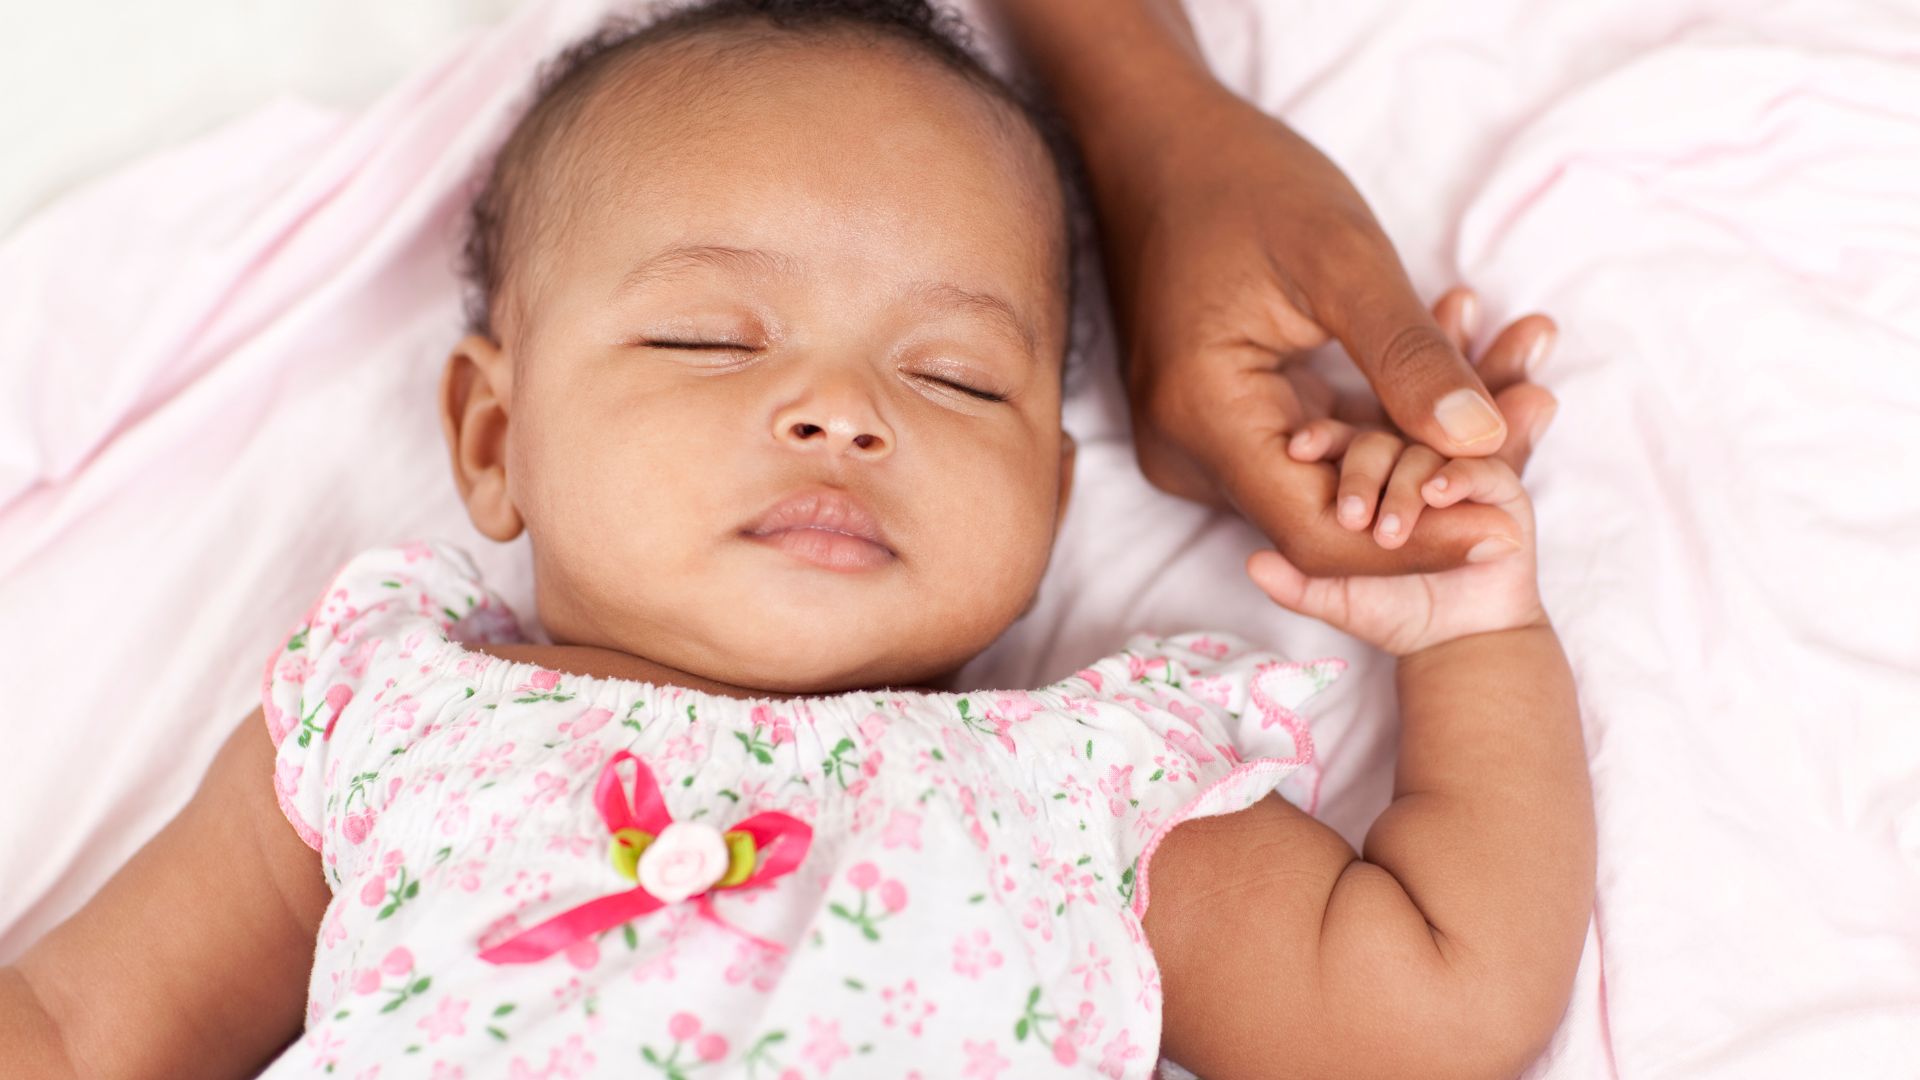 A baby sleeping on her back and her hand is wrapped around a mother’s finger. The baby is wearing a pink and flowery shirt.